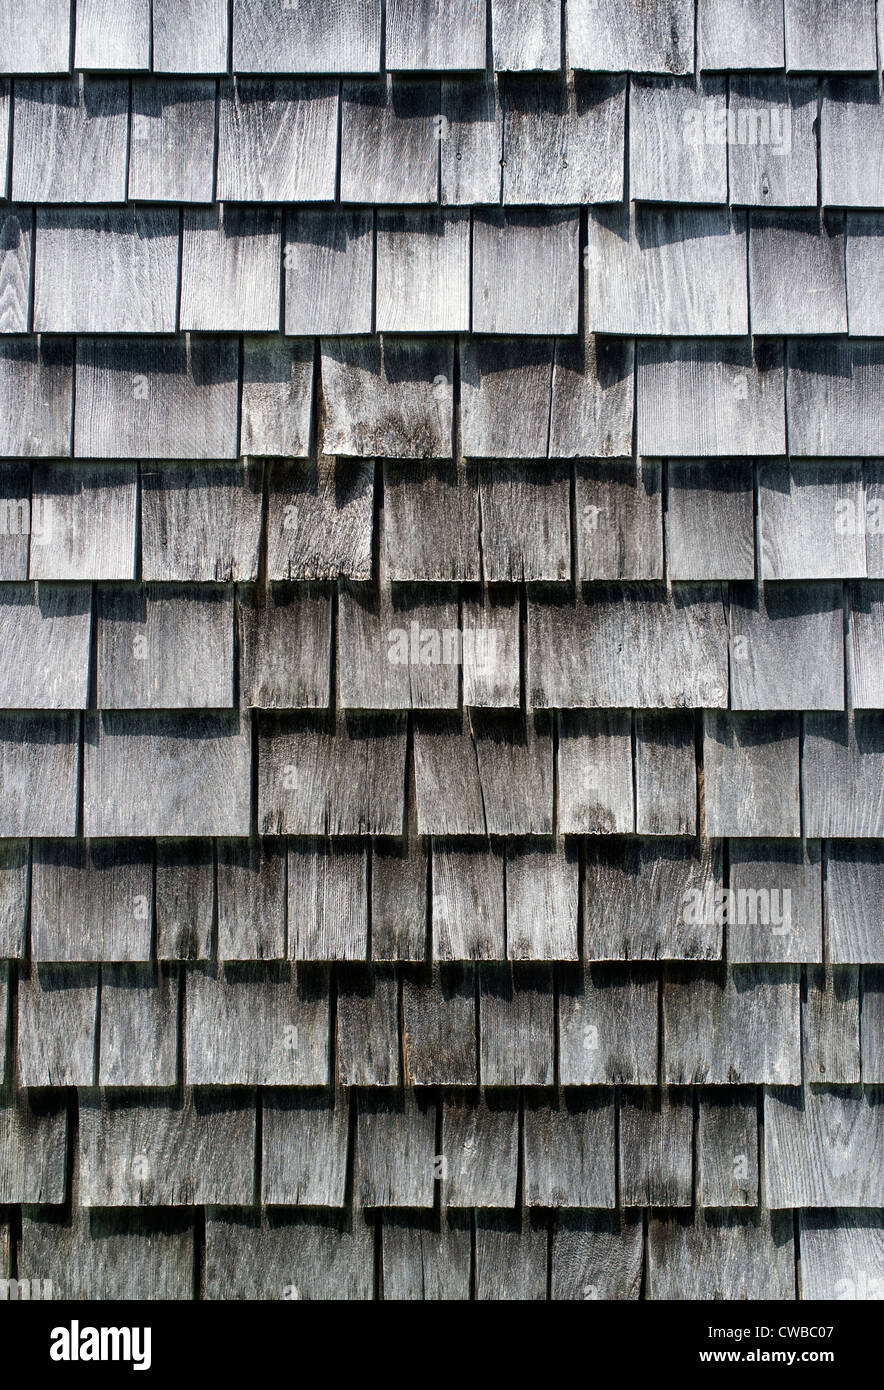 Old and weathered wooden tiles background Stock Photo